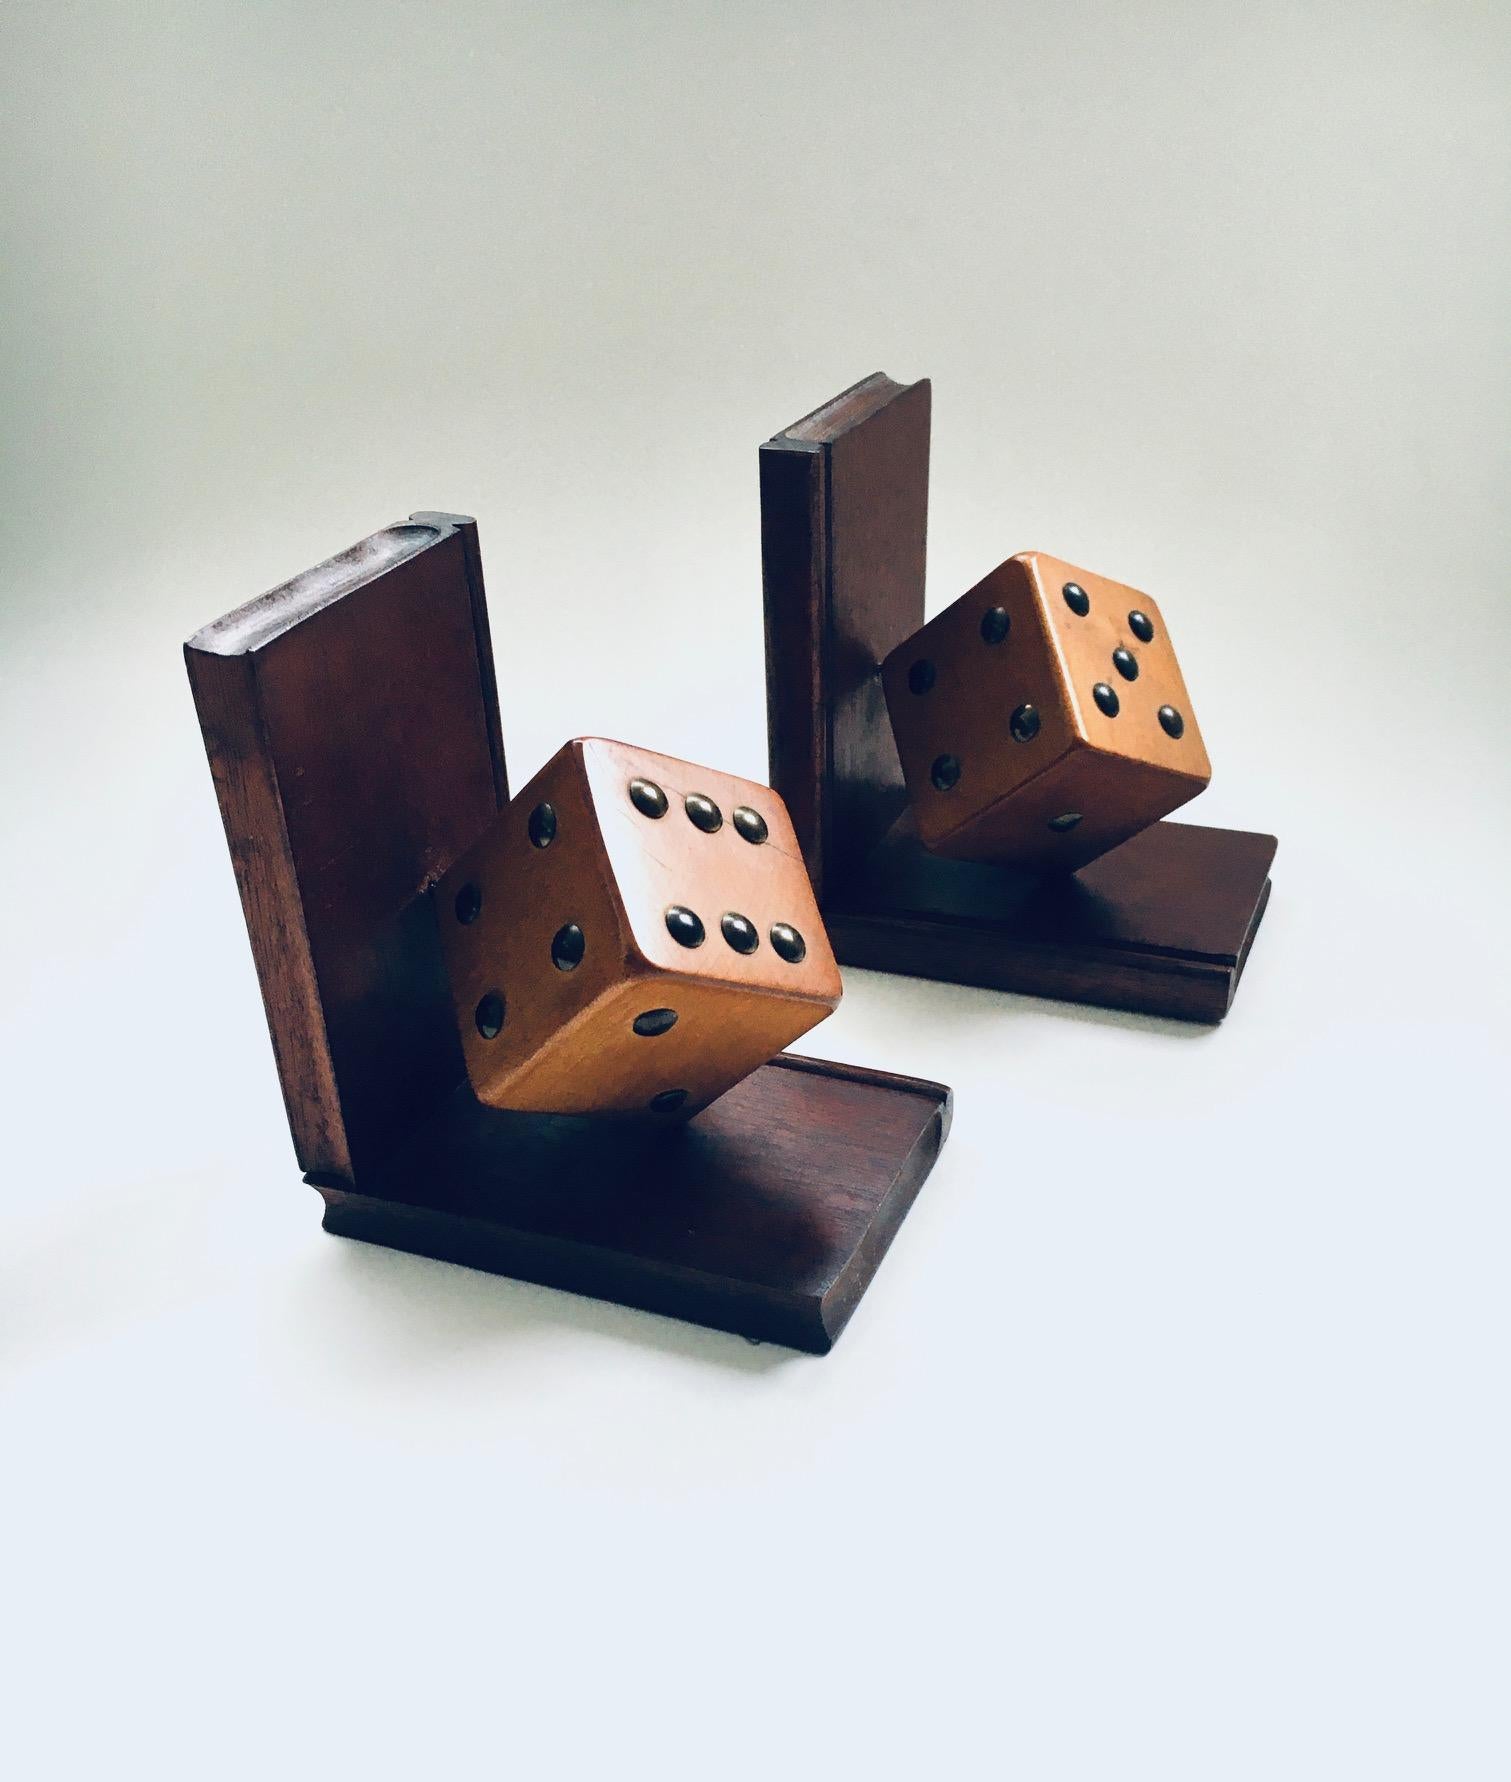 Early 20th Century Arts & Crafts pair of wooden Dice Bookends, Belgium 1920's For Sale